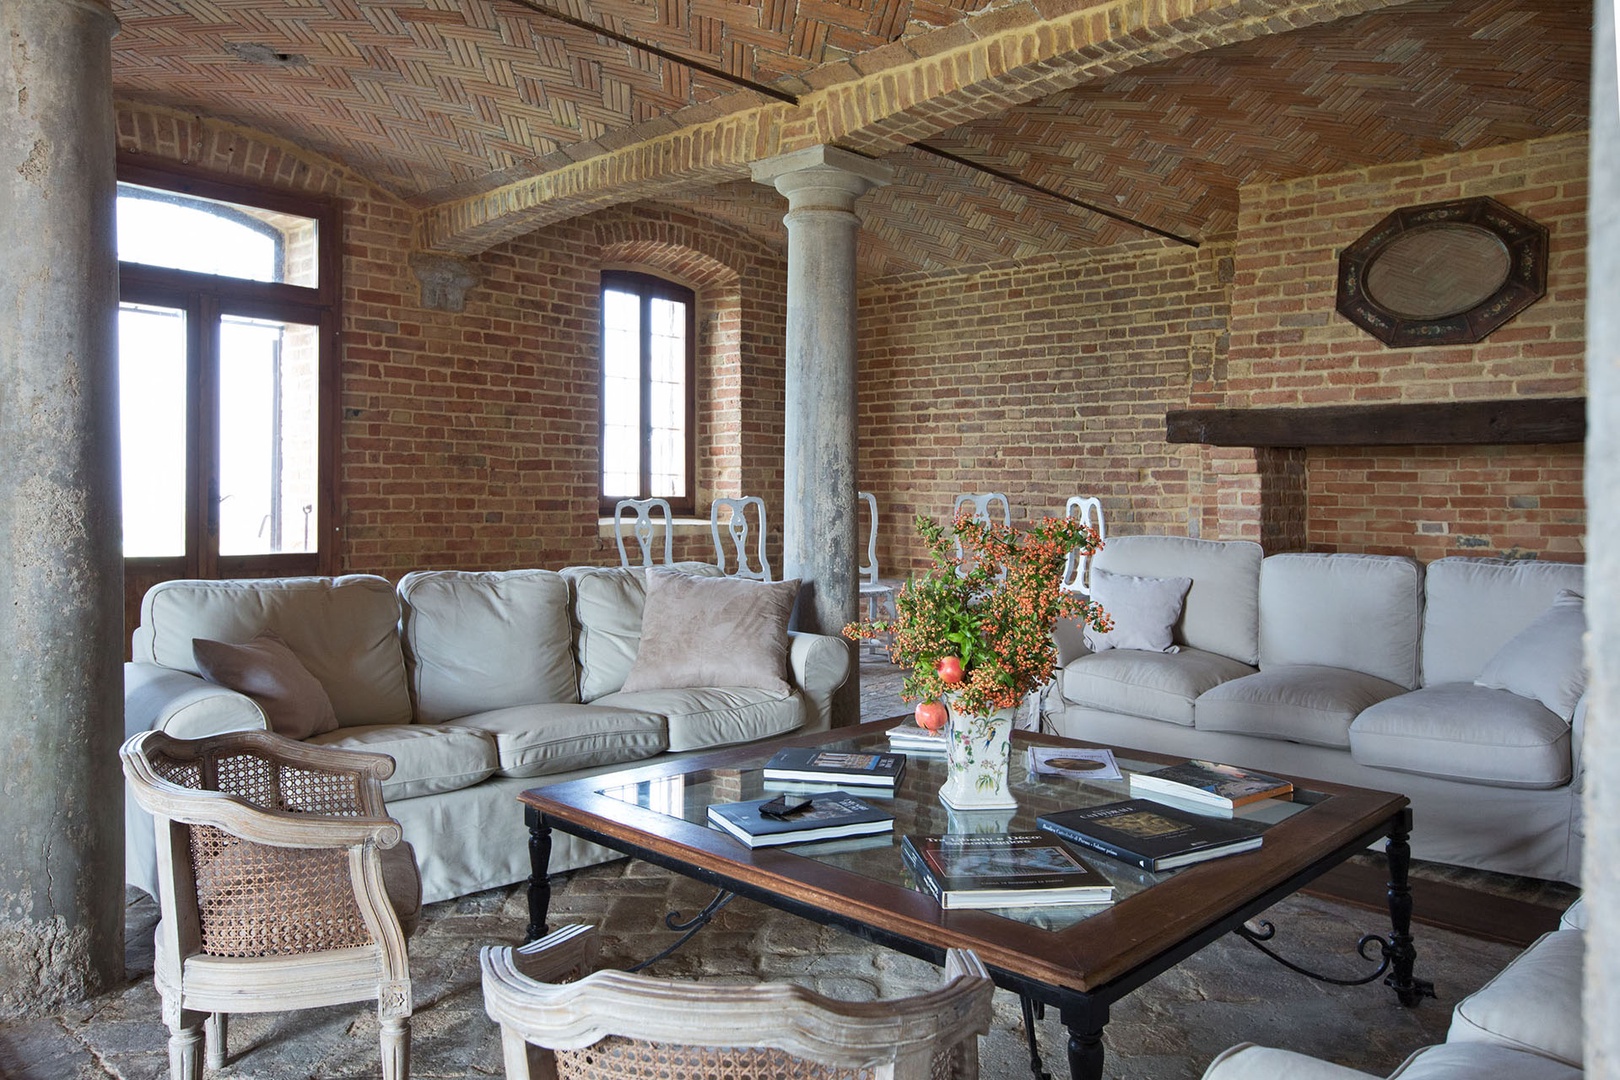 The spacious living room with brick arches and stone columns and lots of seating